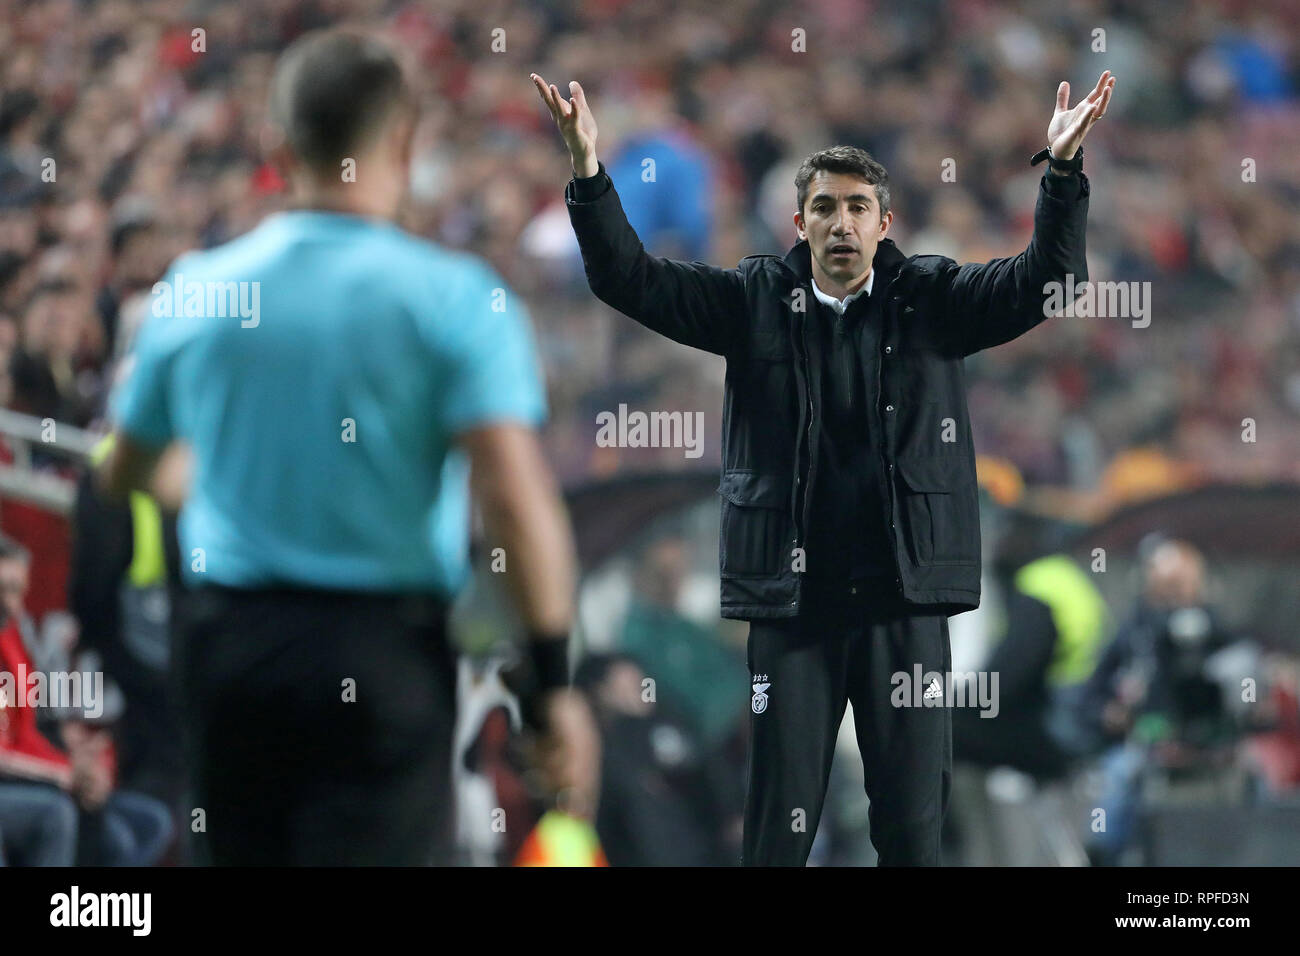 Coach Bruno Lage of SL Benfica in action during the Europa League 2018/2019 footballl match between SL Benfica vs Galatasaray AS.  (Final score: SL Benfica 0 - 0 Galatasaray AS) Stock Photo